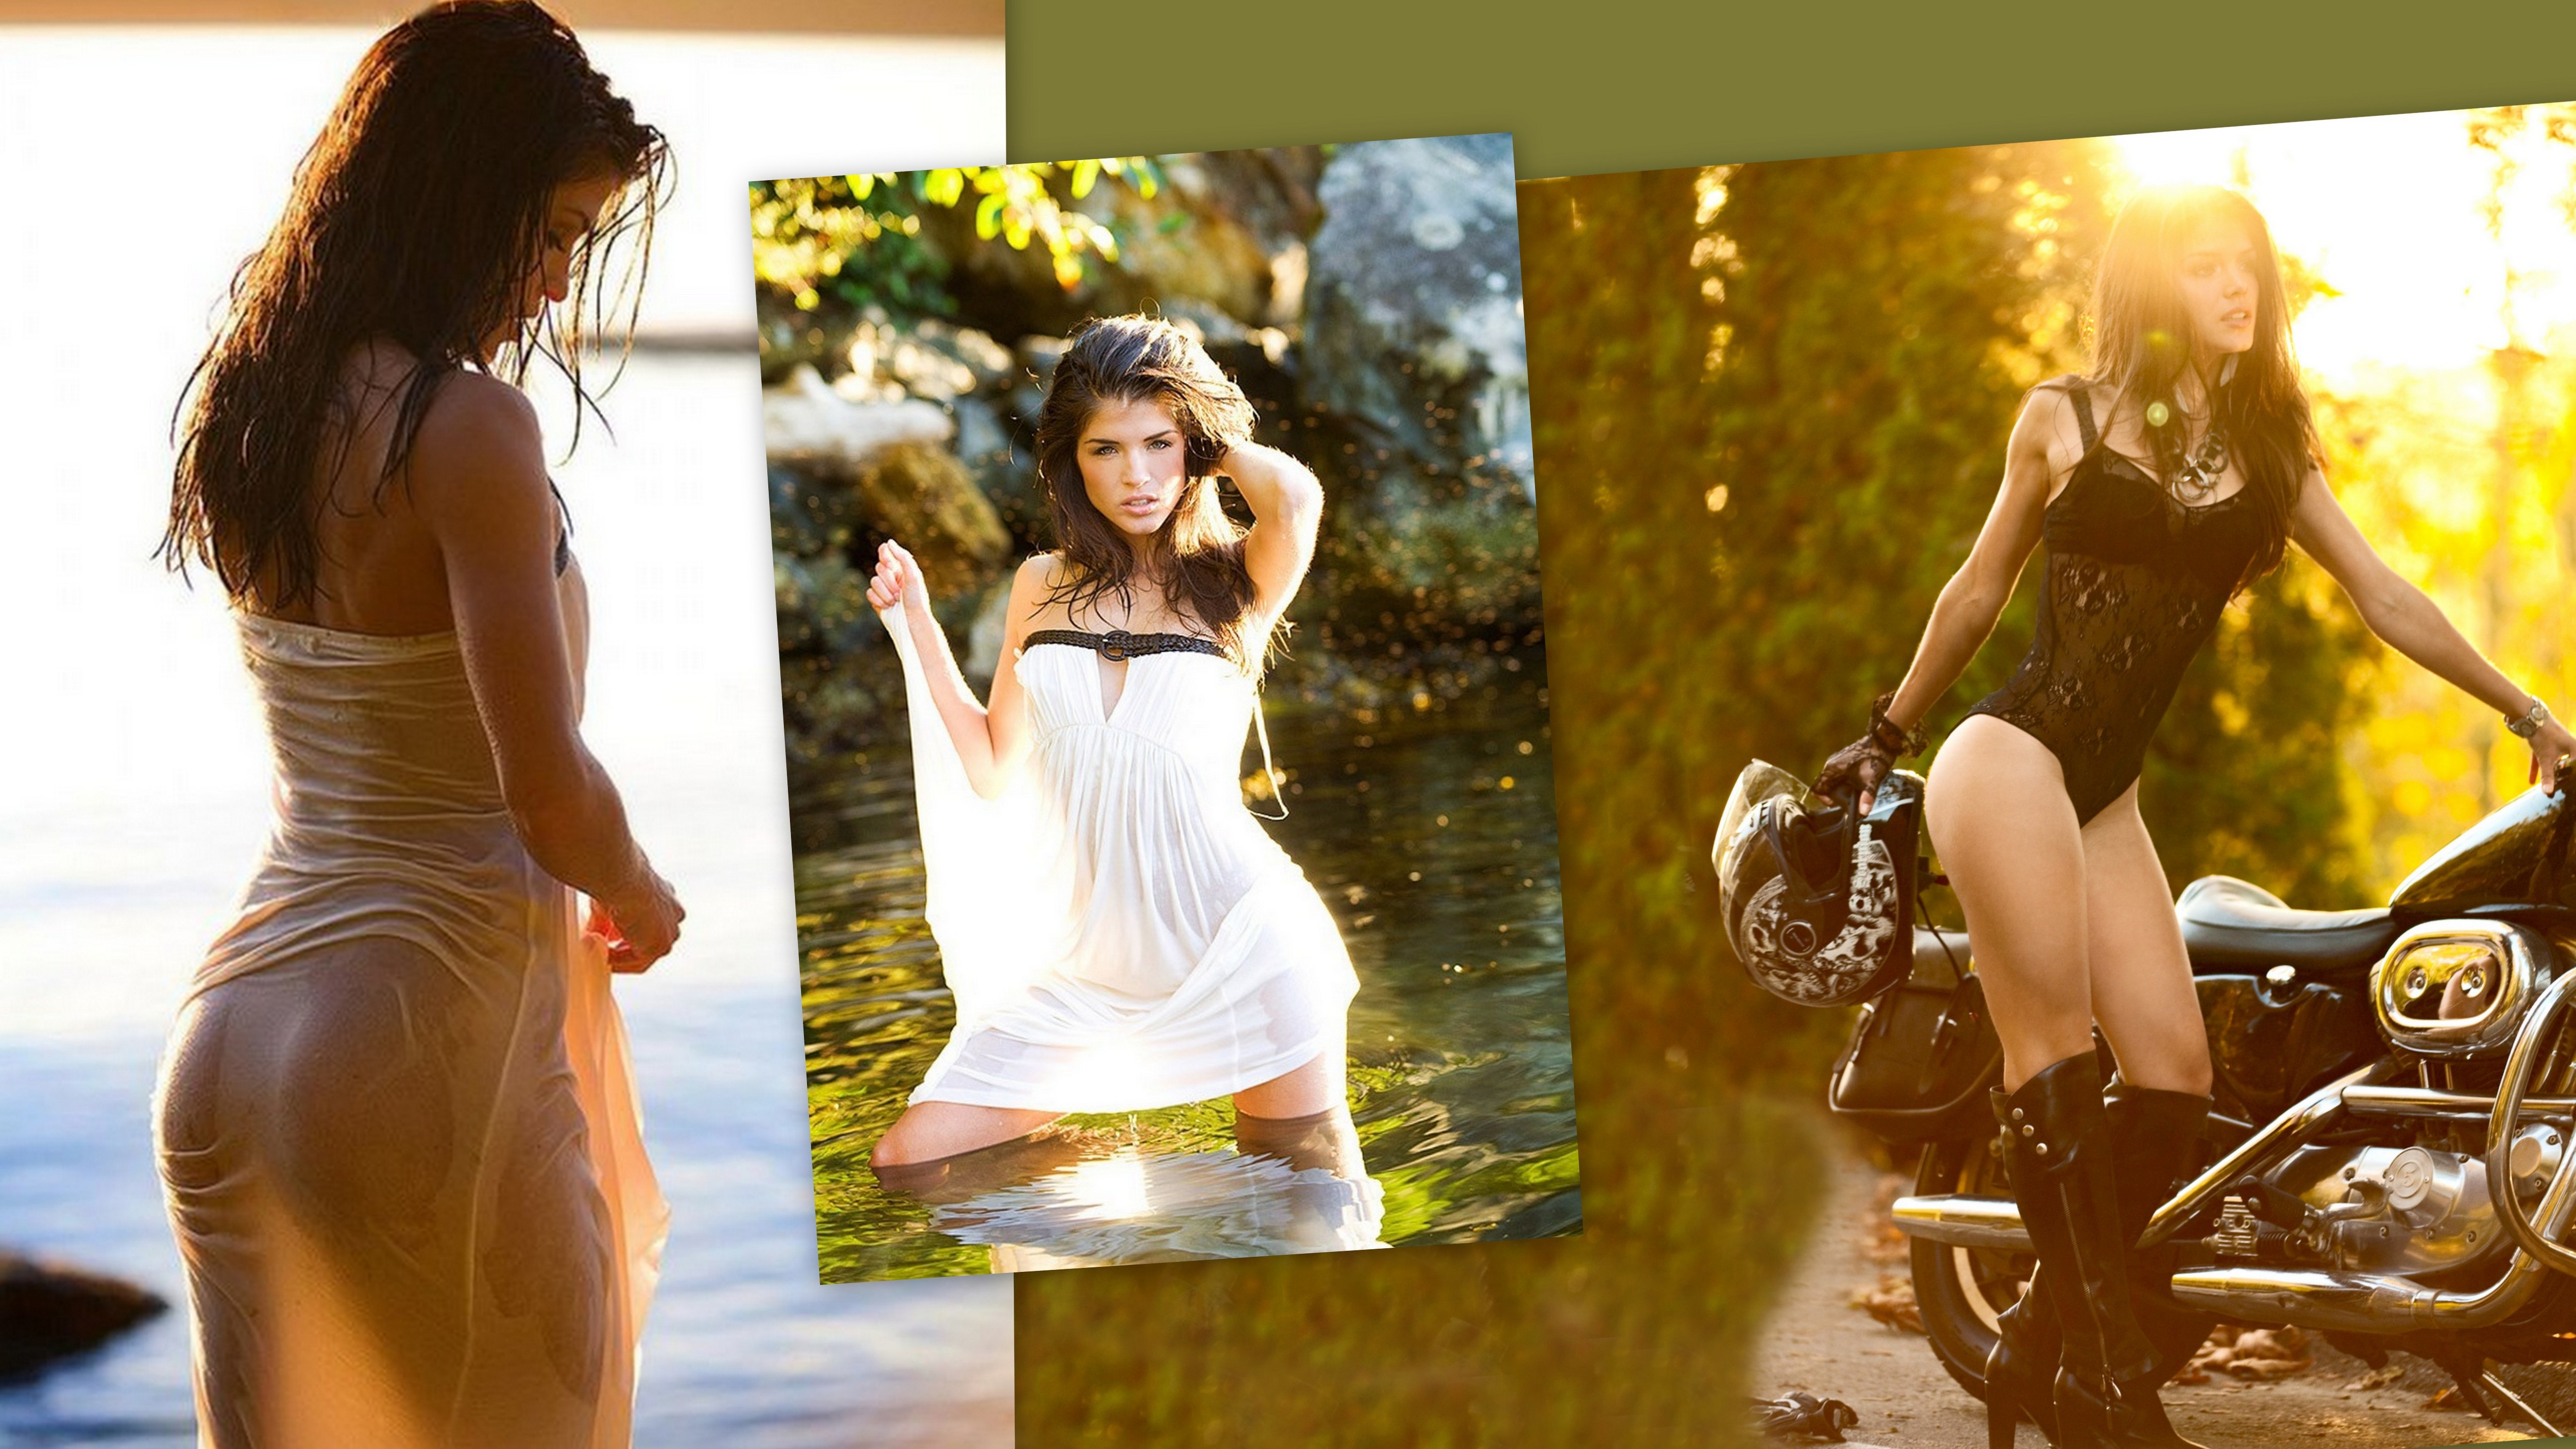 Marie Avgeropoulos Wallpaper: Marie Avgeropoulos Color2.